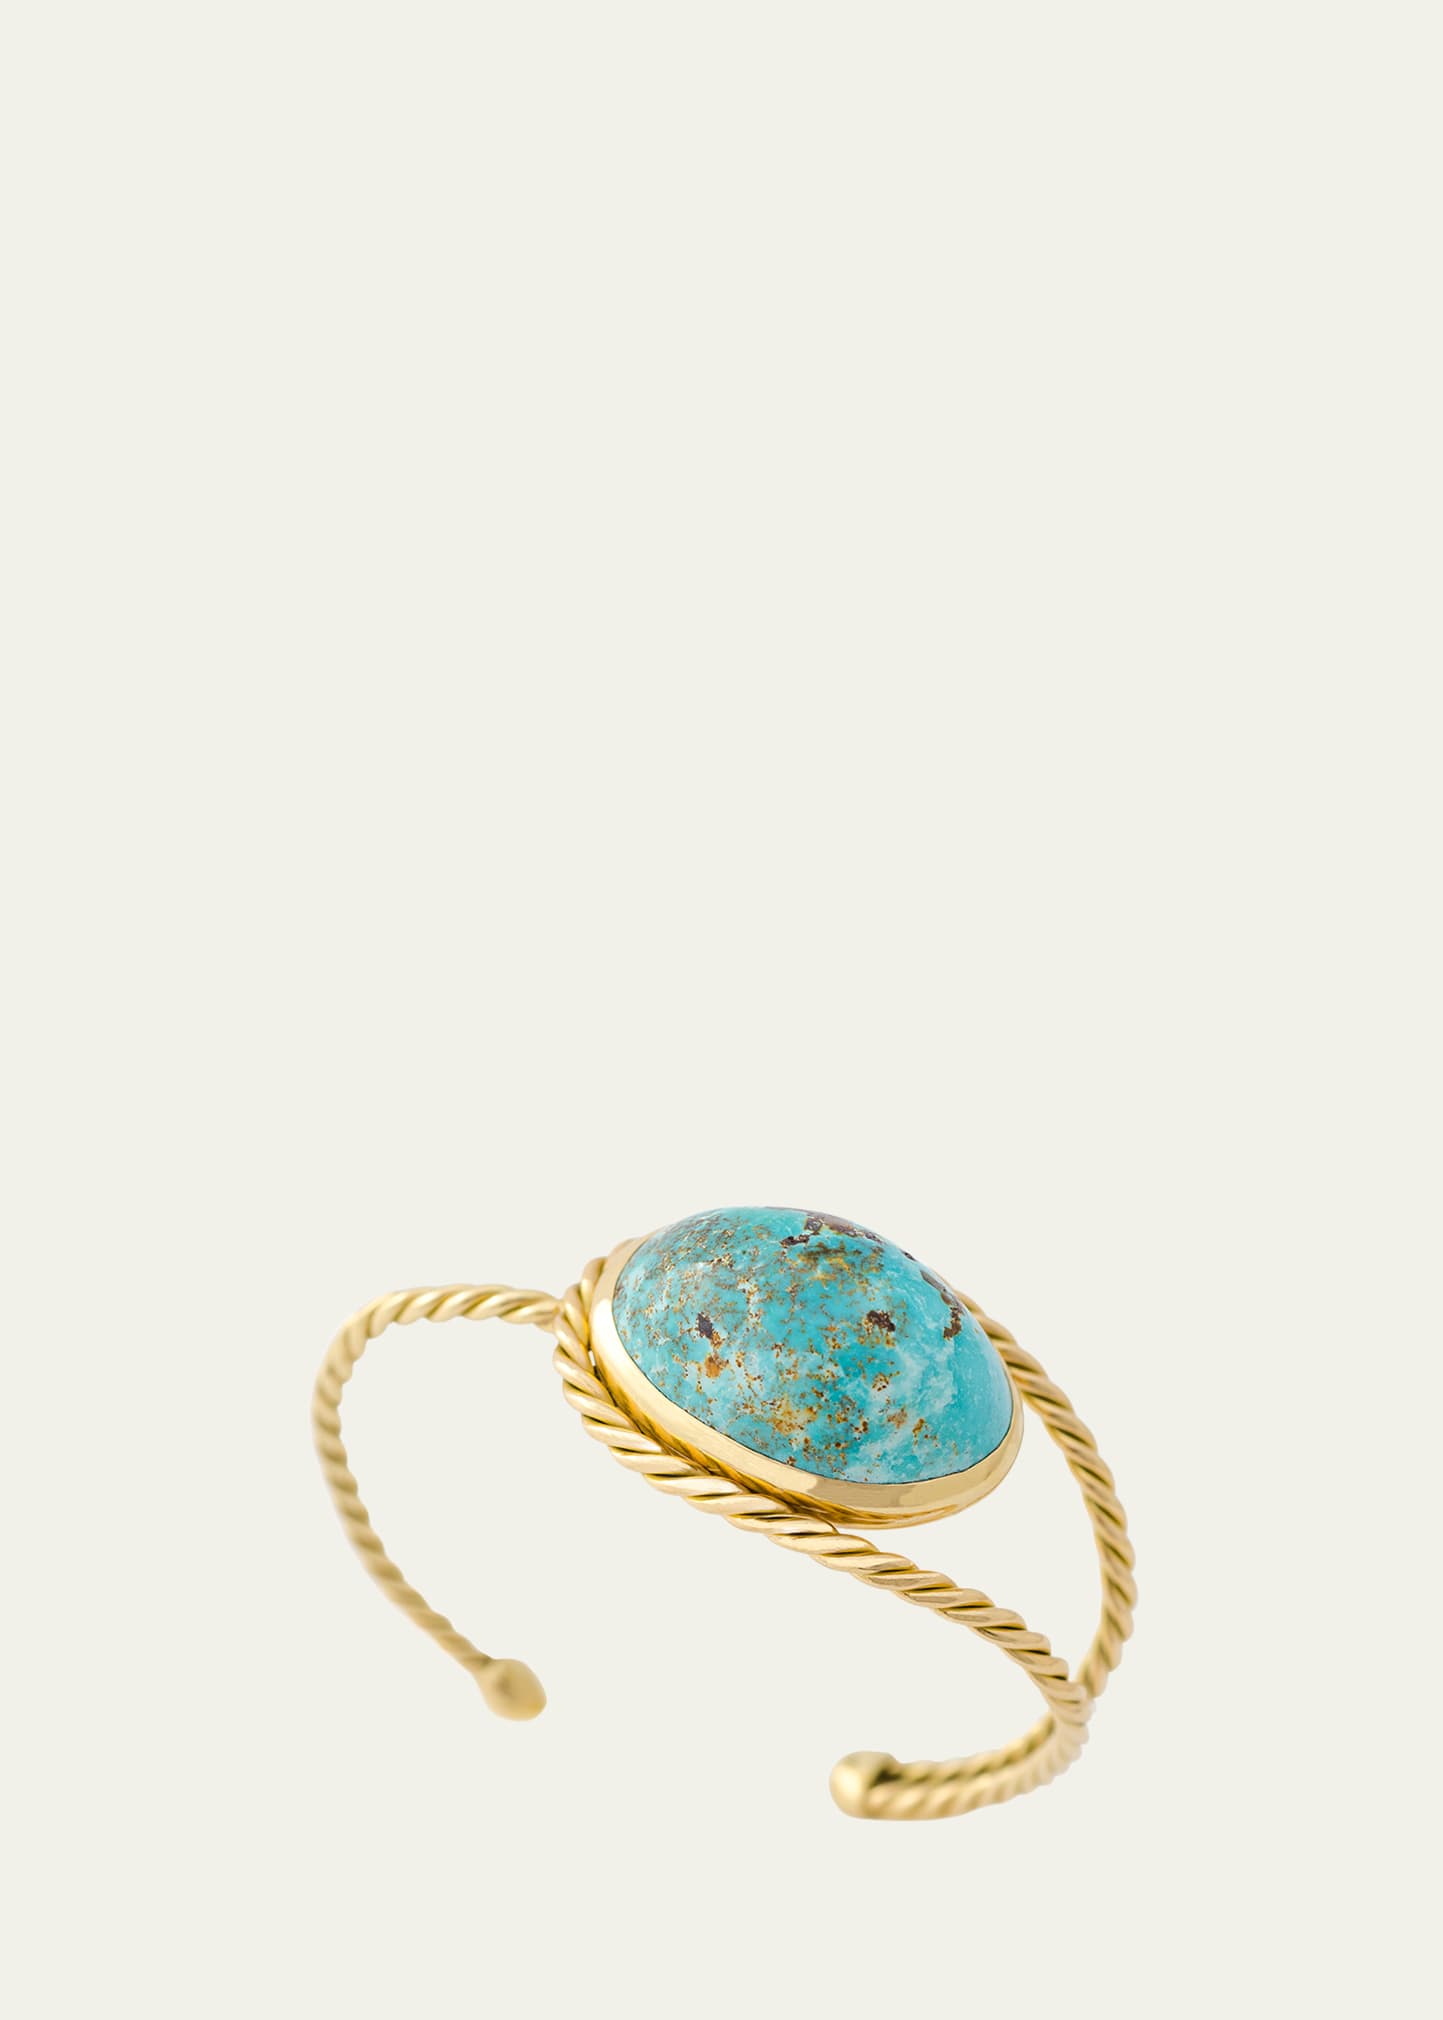 Persian Dome Turquoise Cabochon Hand-Twisted Gold Cuff Bracelet